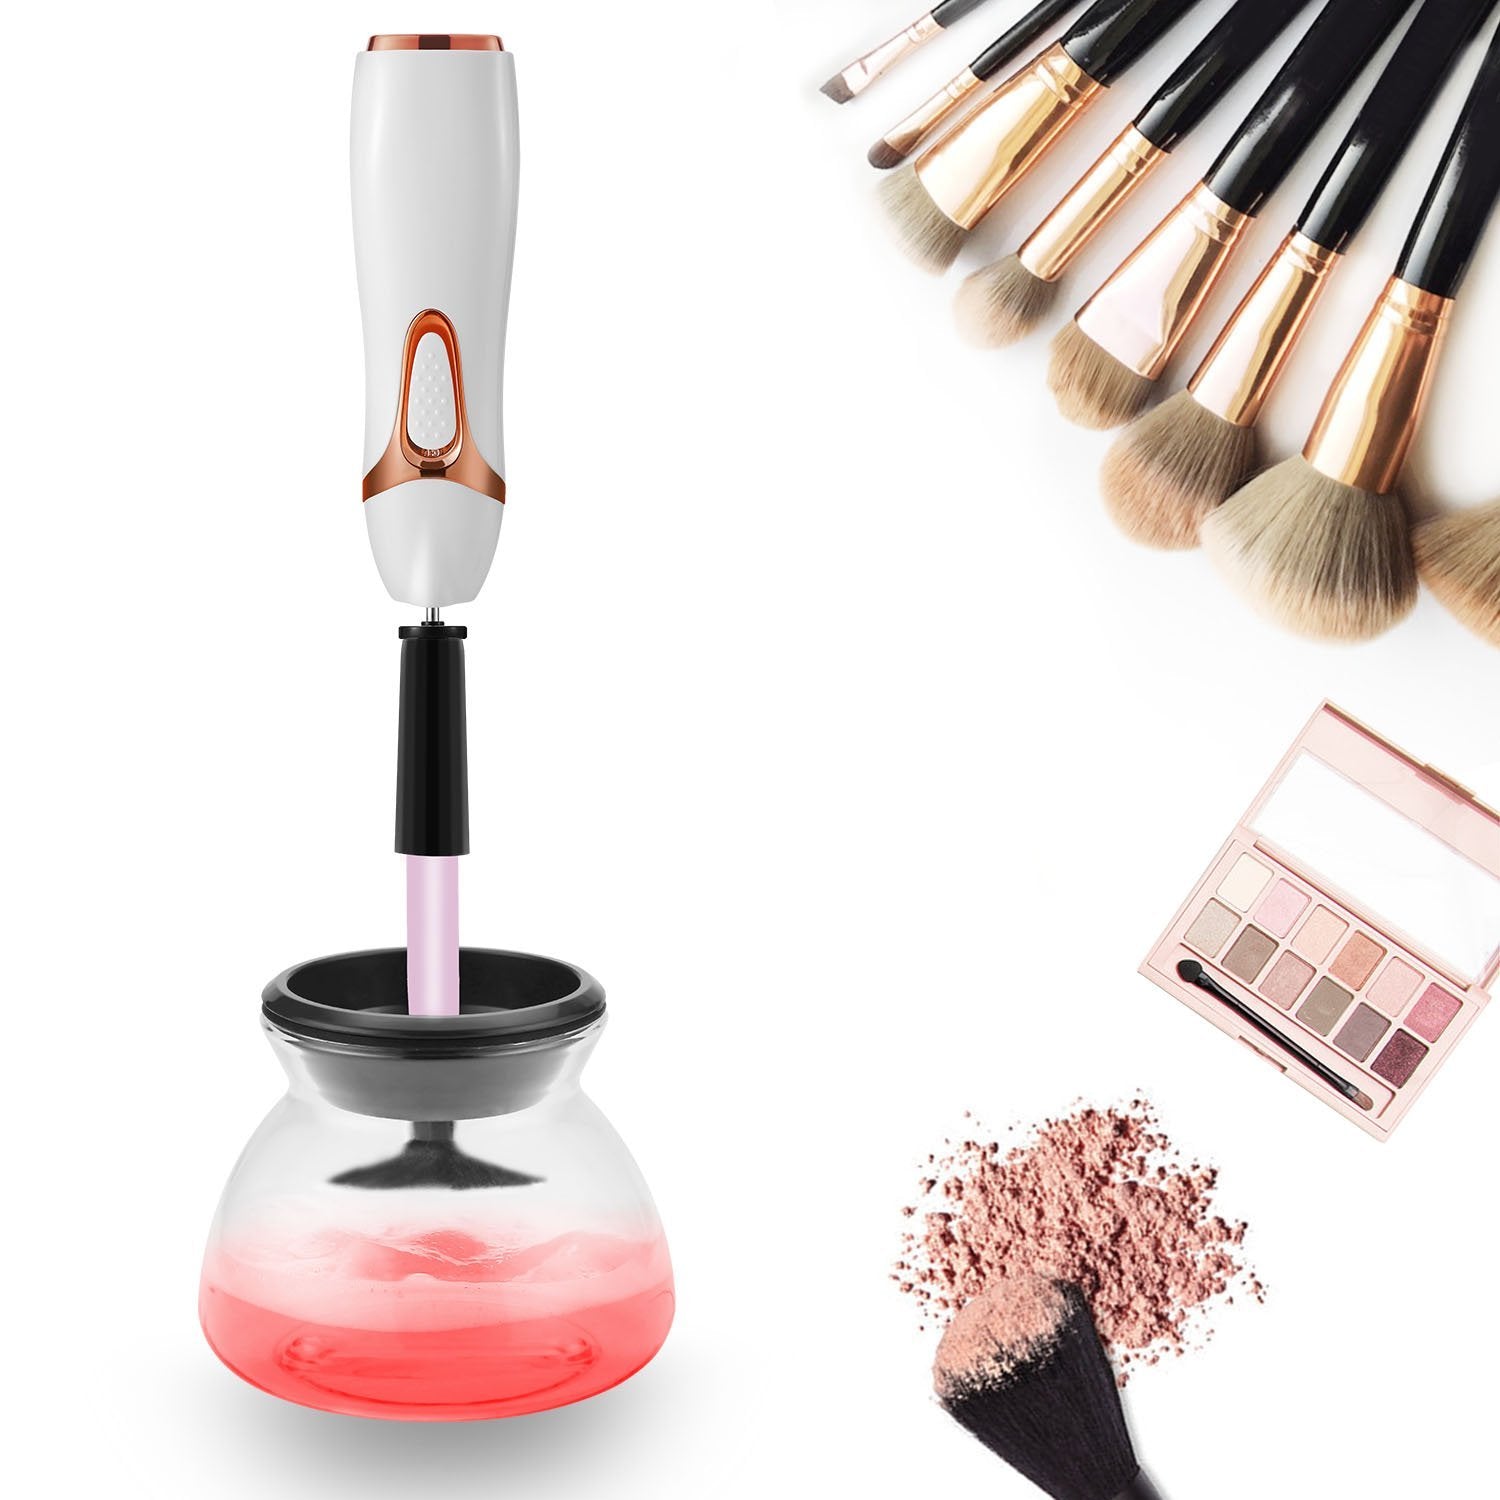 Fast Makeup Brush Cleaner & Dryer Machine 8 Collar Sizes Electric Spinner  Tool